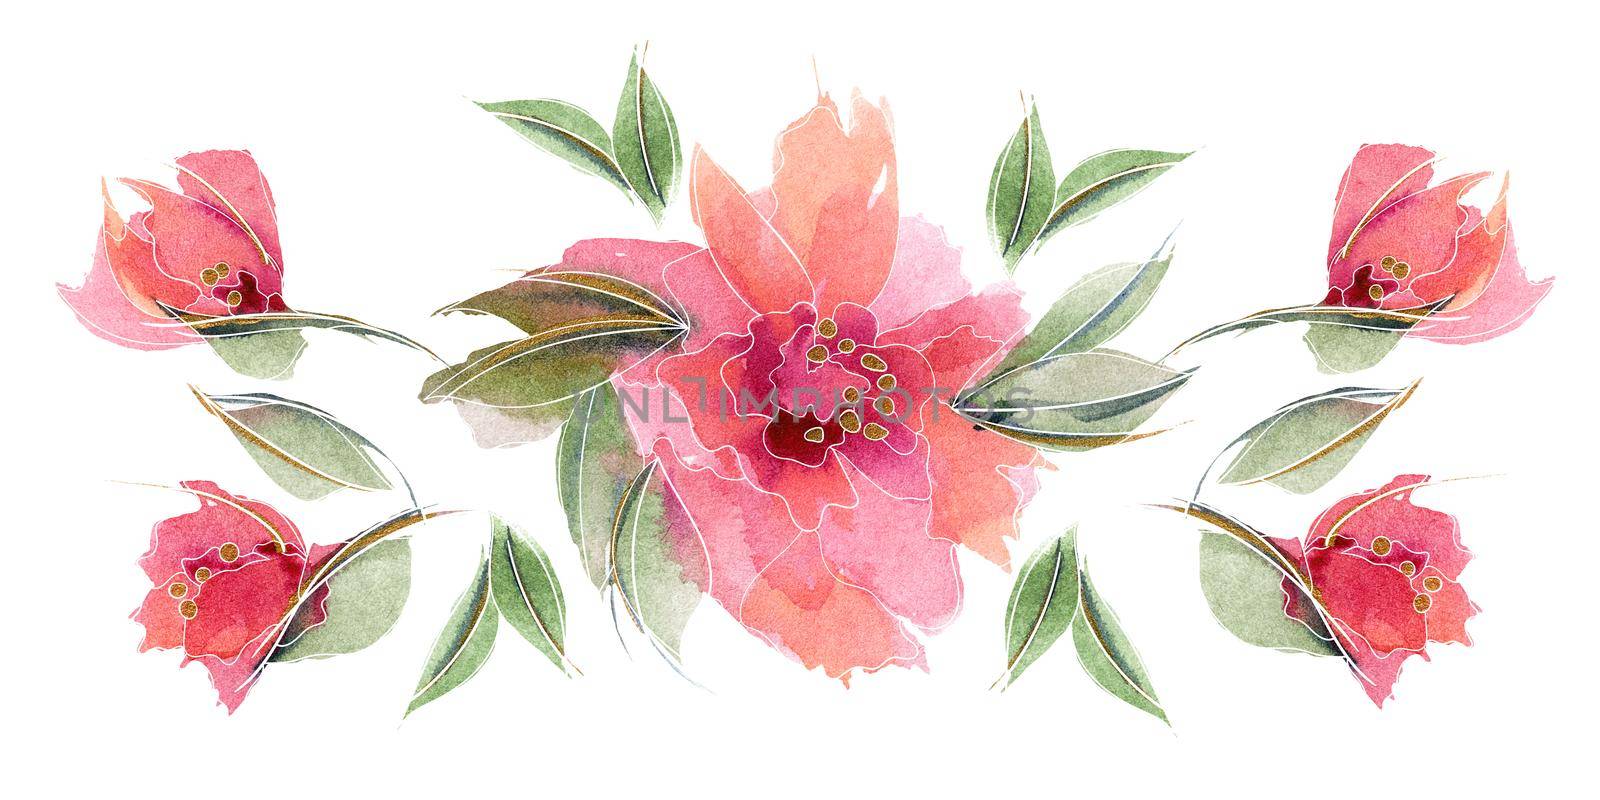 Spring mood with nature ditsy watercolor garland. Pink floral chaplet composition with delicate rose flowers and leaves